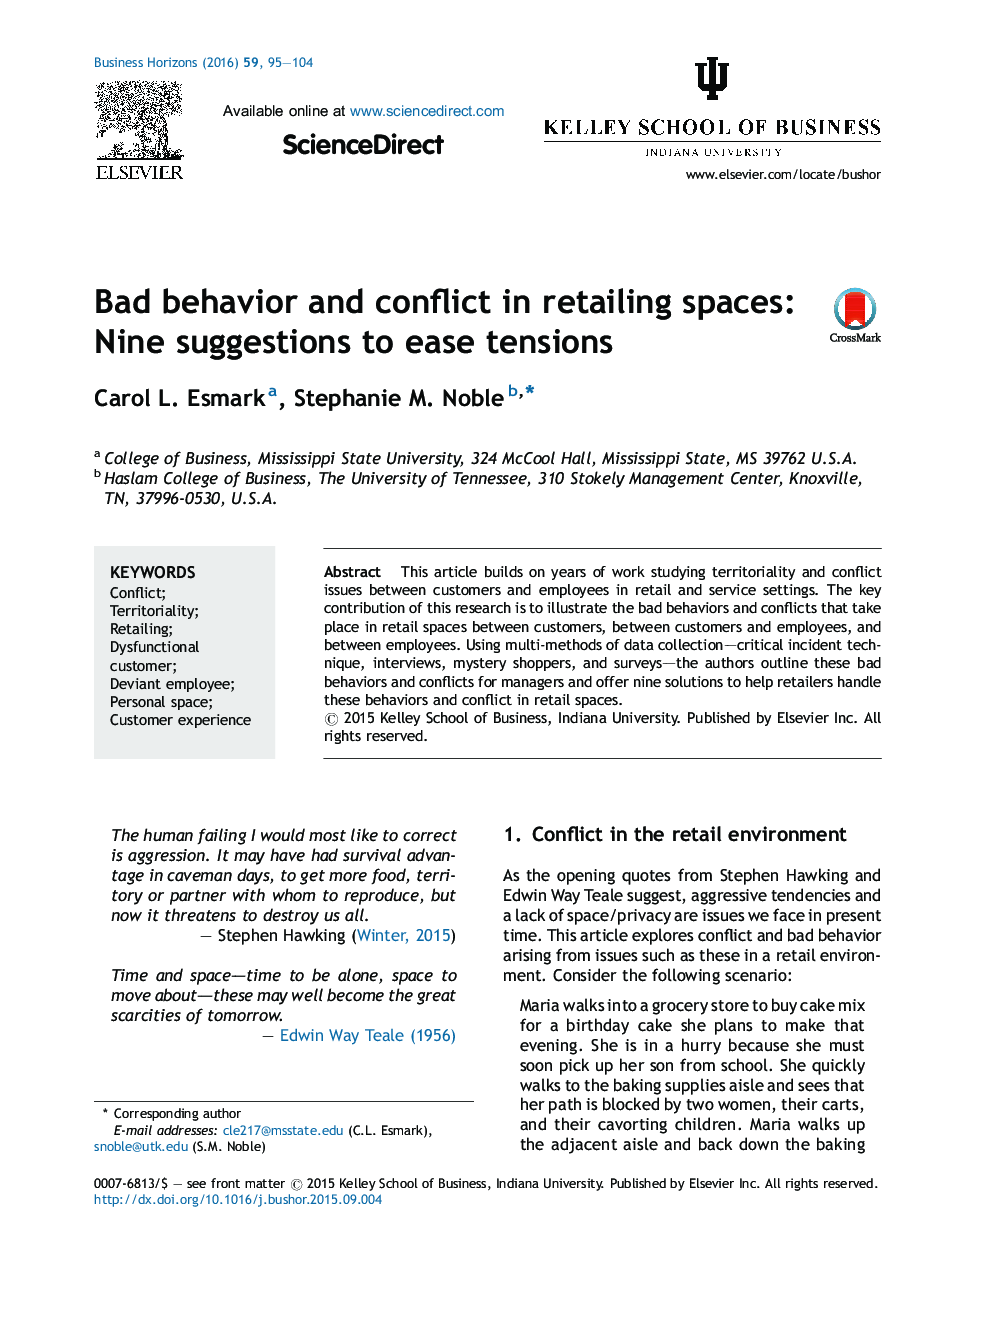 Bad behavior and conflict in retailing spaces: Nine suggestions to ease tensions